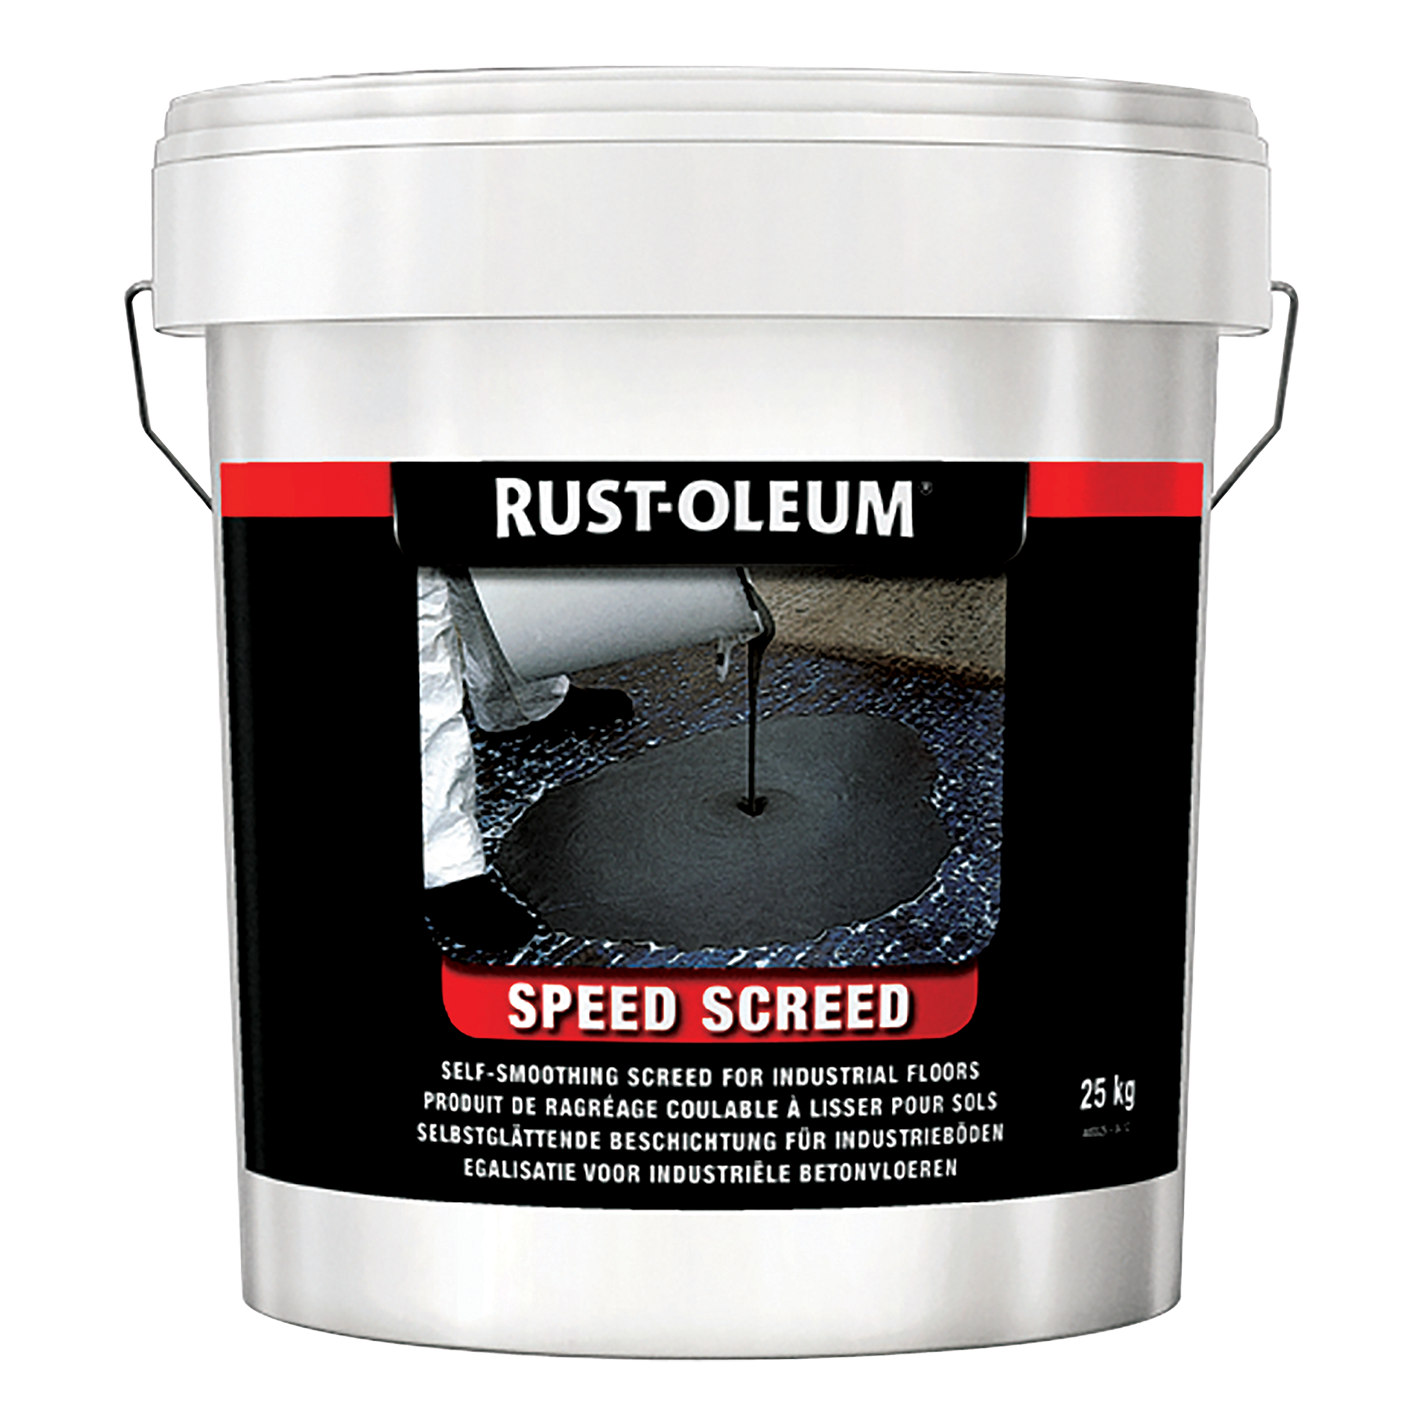 RUST OLEUM SPEED SCREED 25KG | Centinal Group